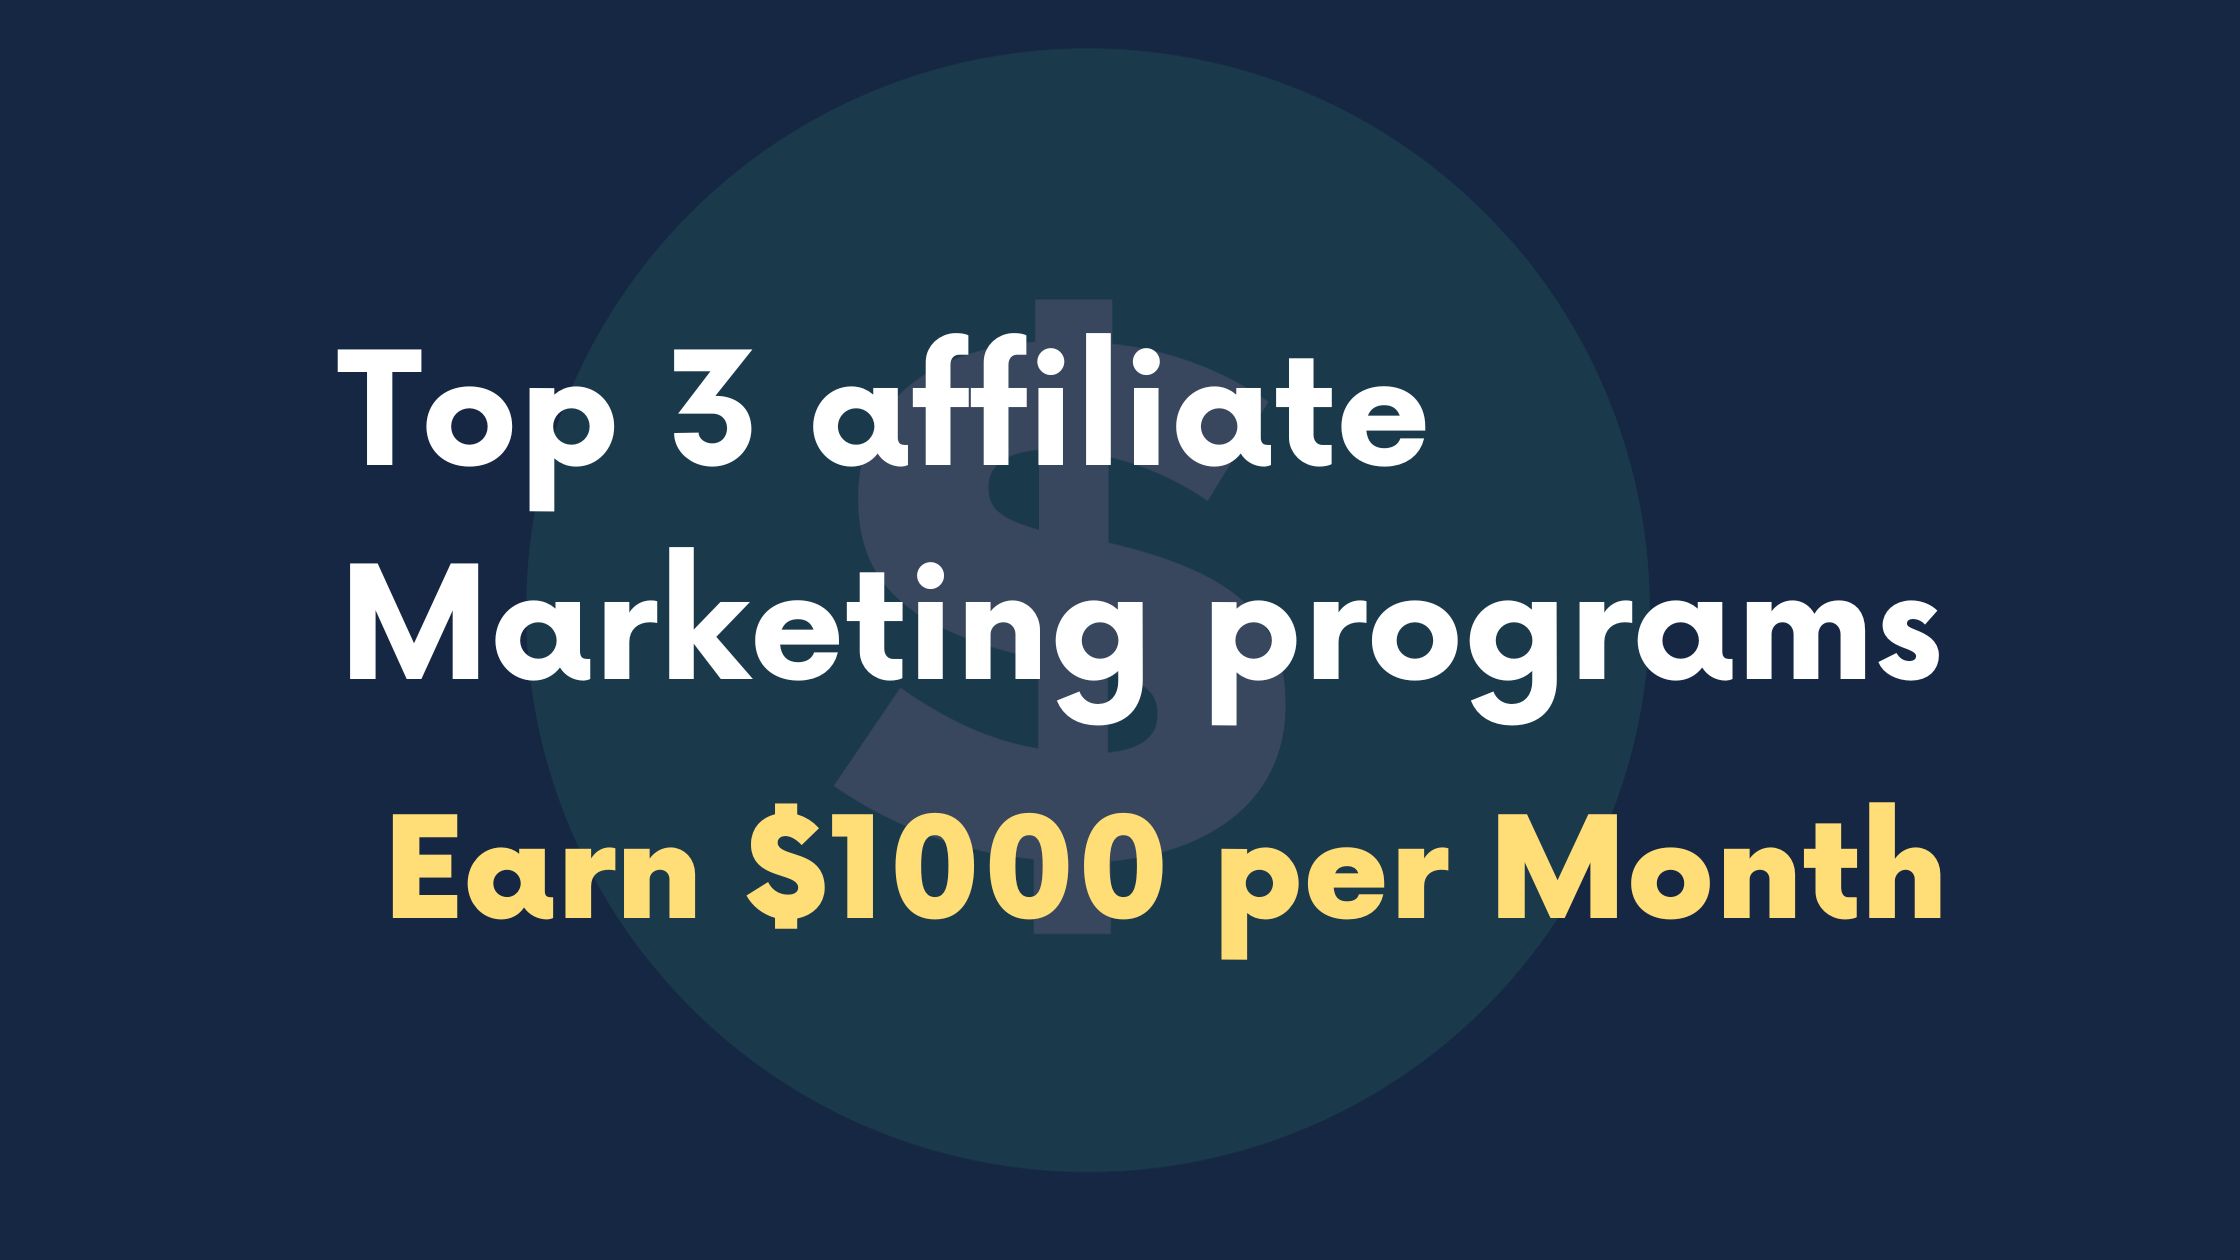 Top 3 affiliate Marketing programs to earn $1000 per Month